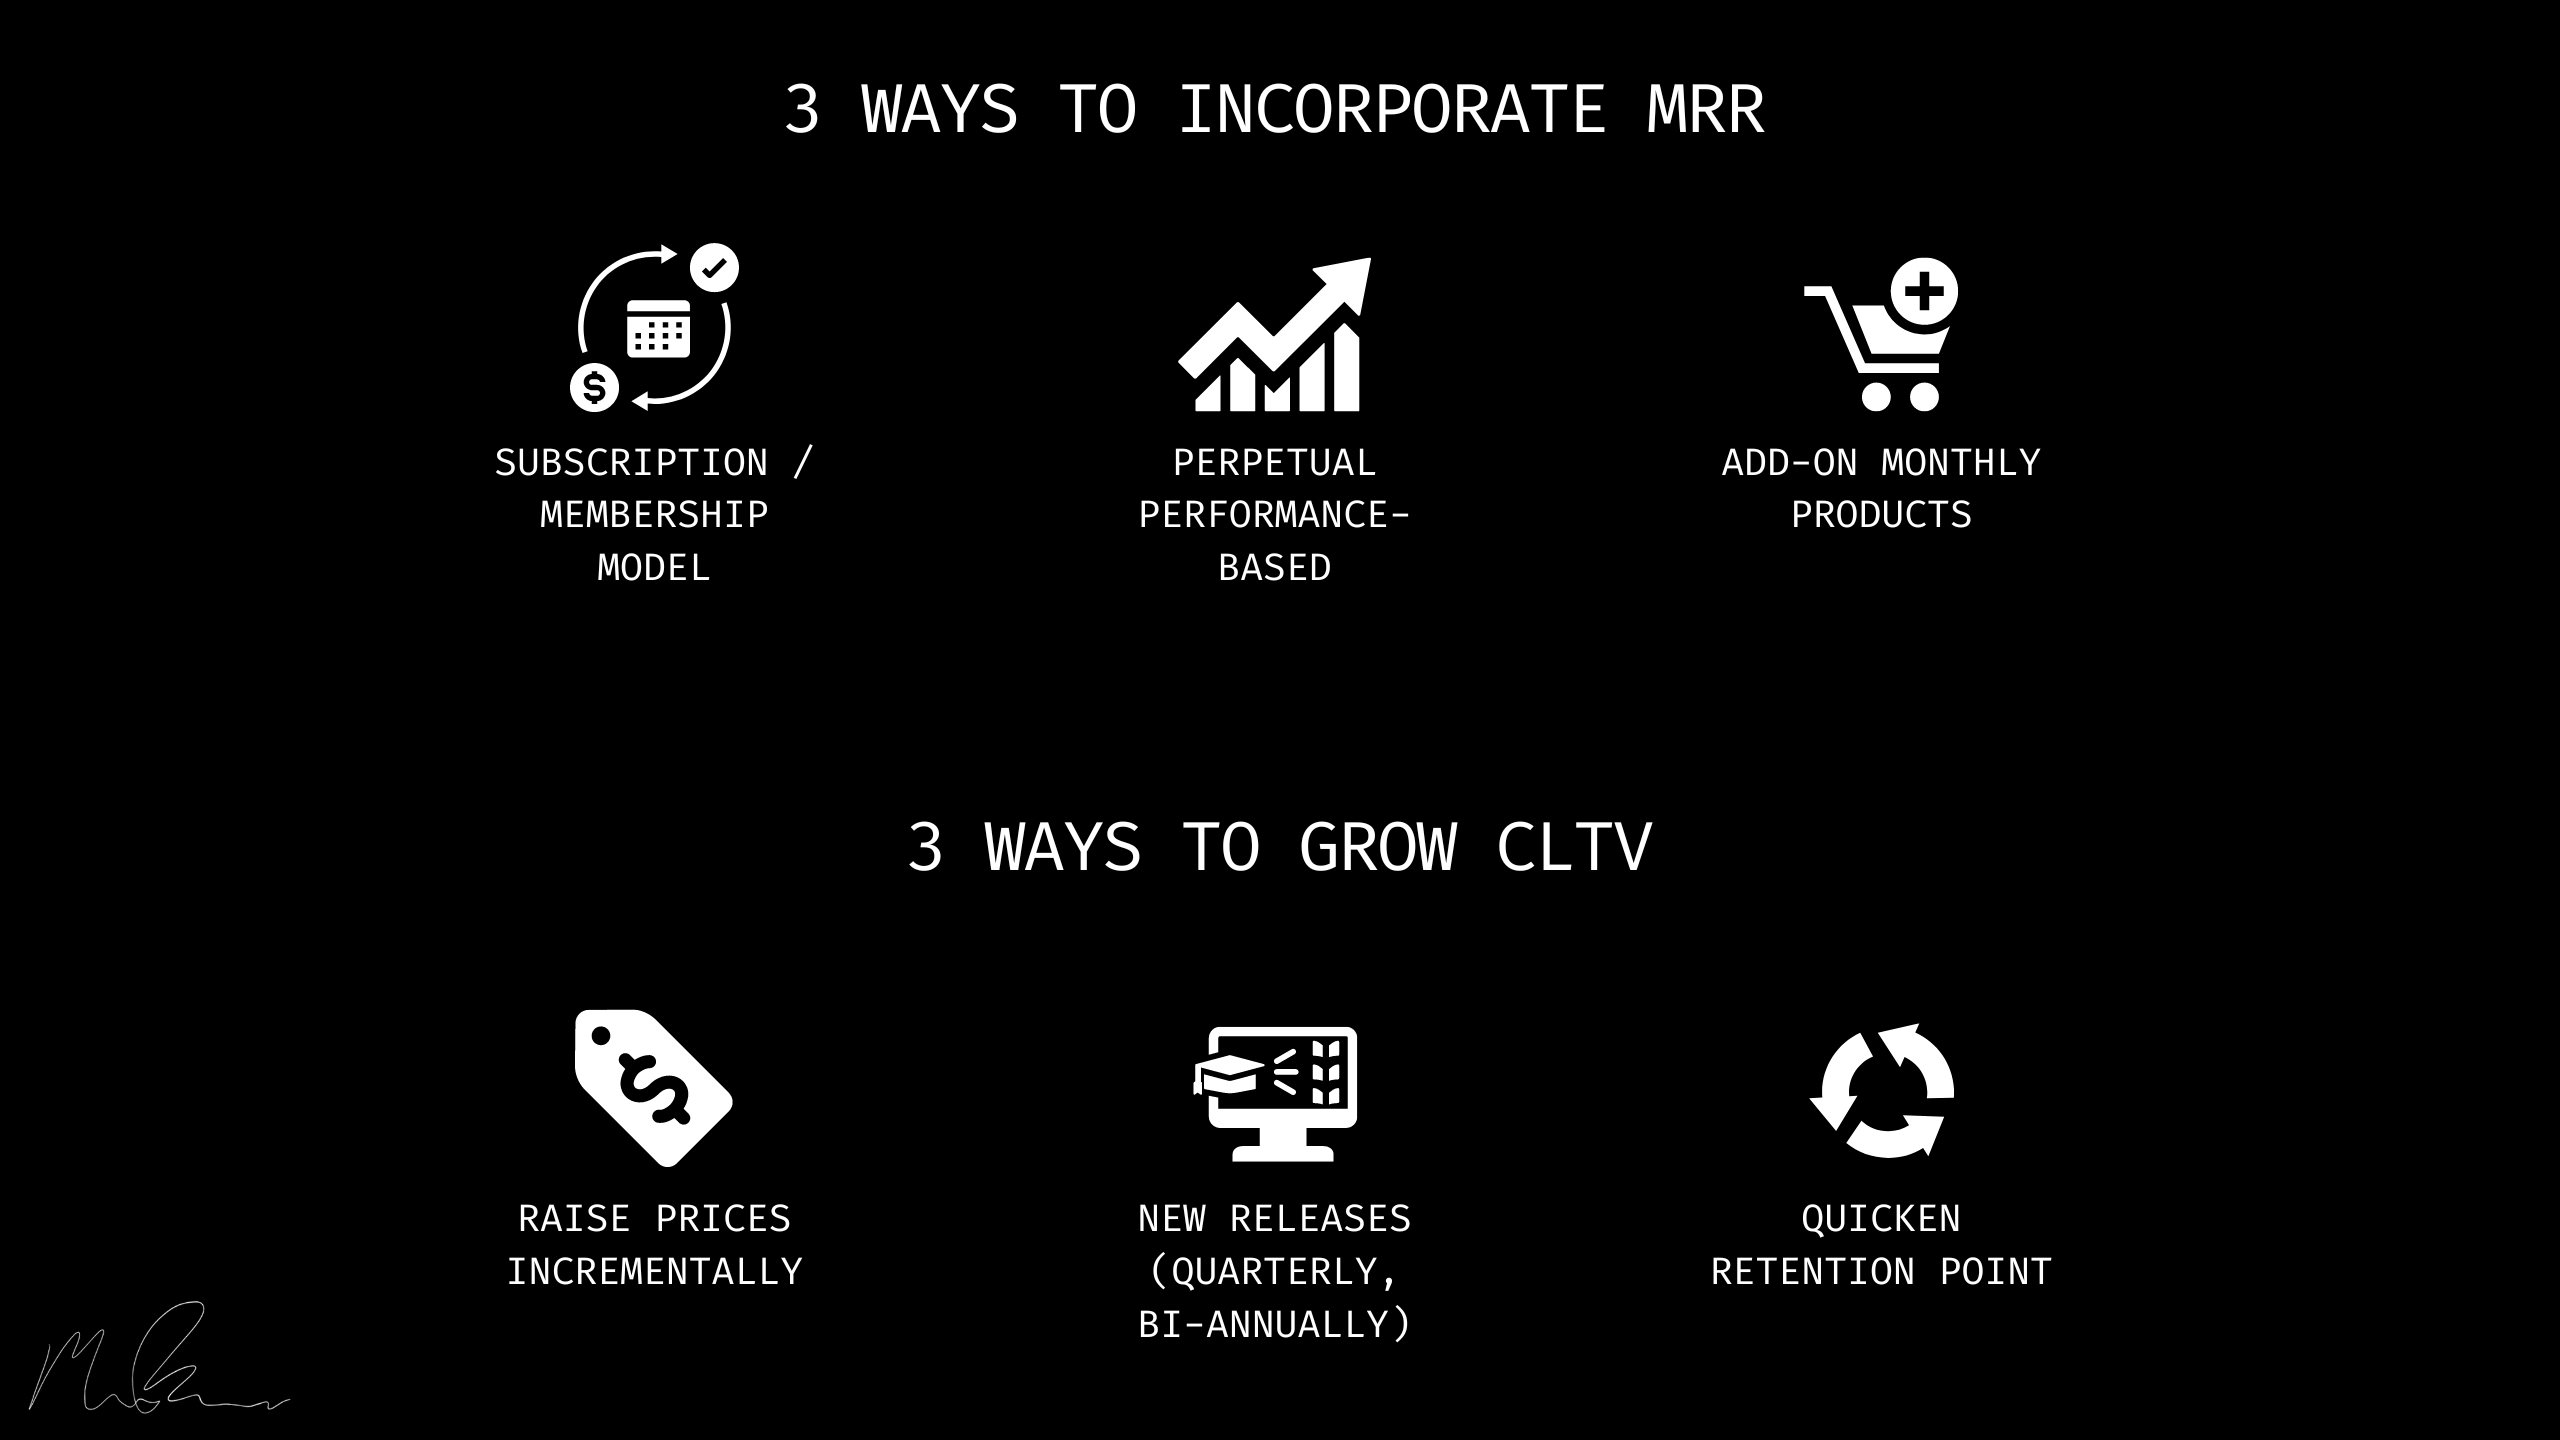 How to Enable MRR & Grow Customer Lifetime Value